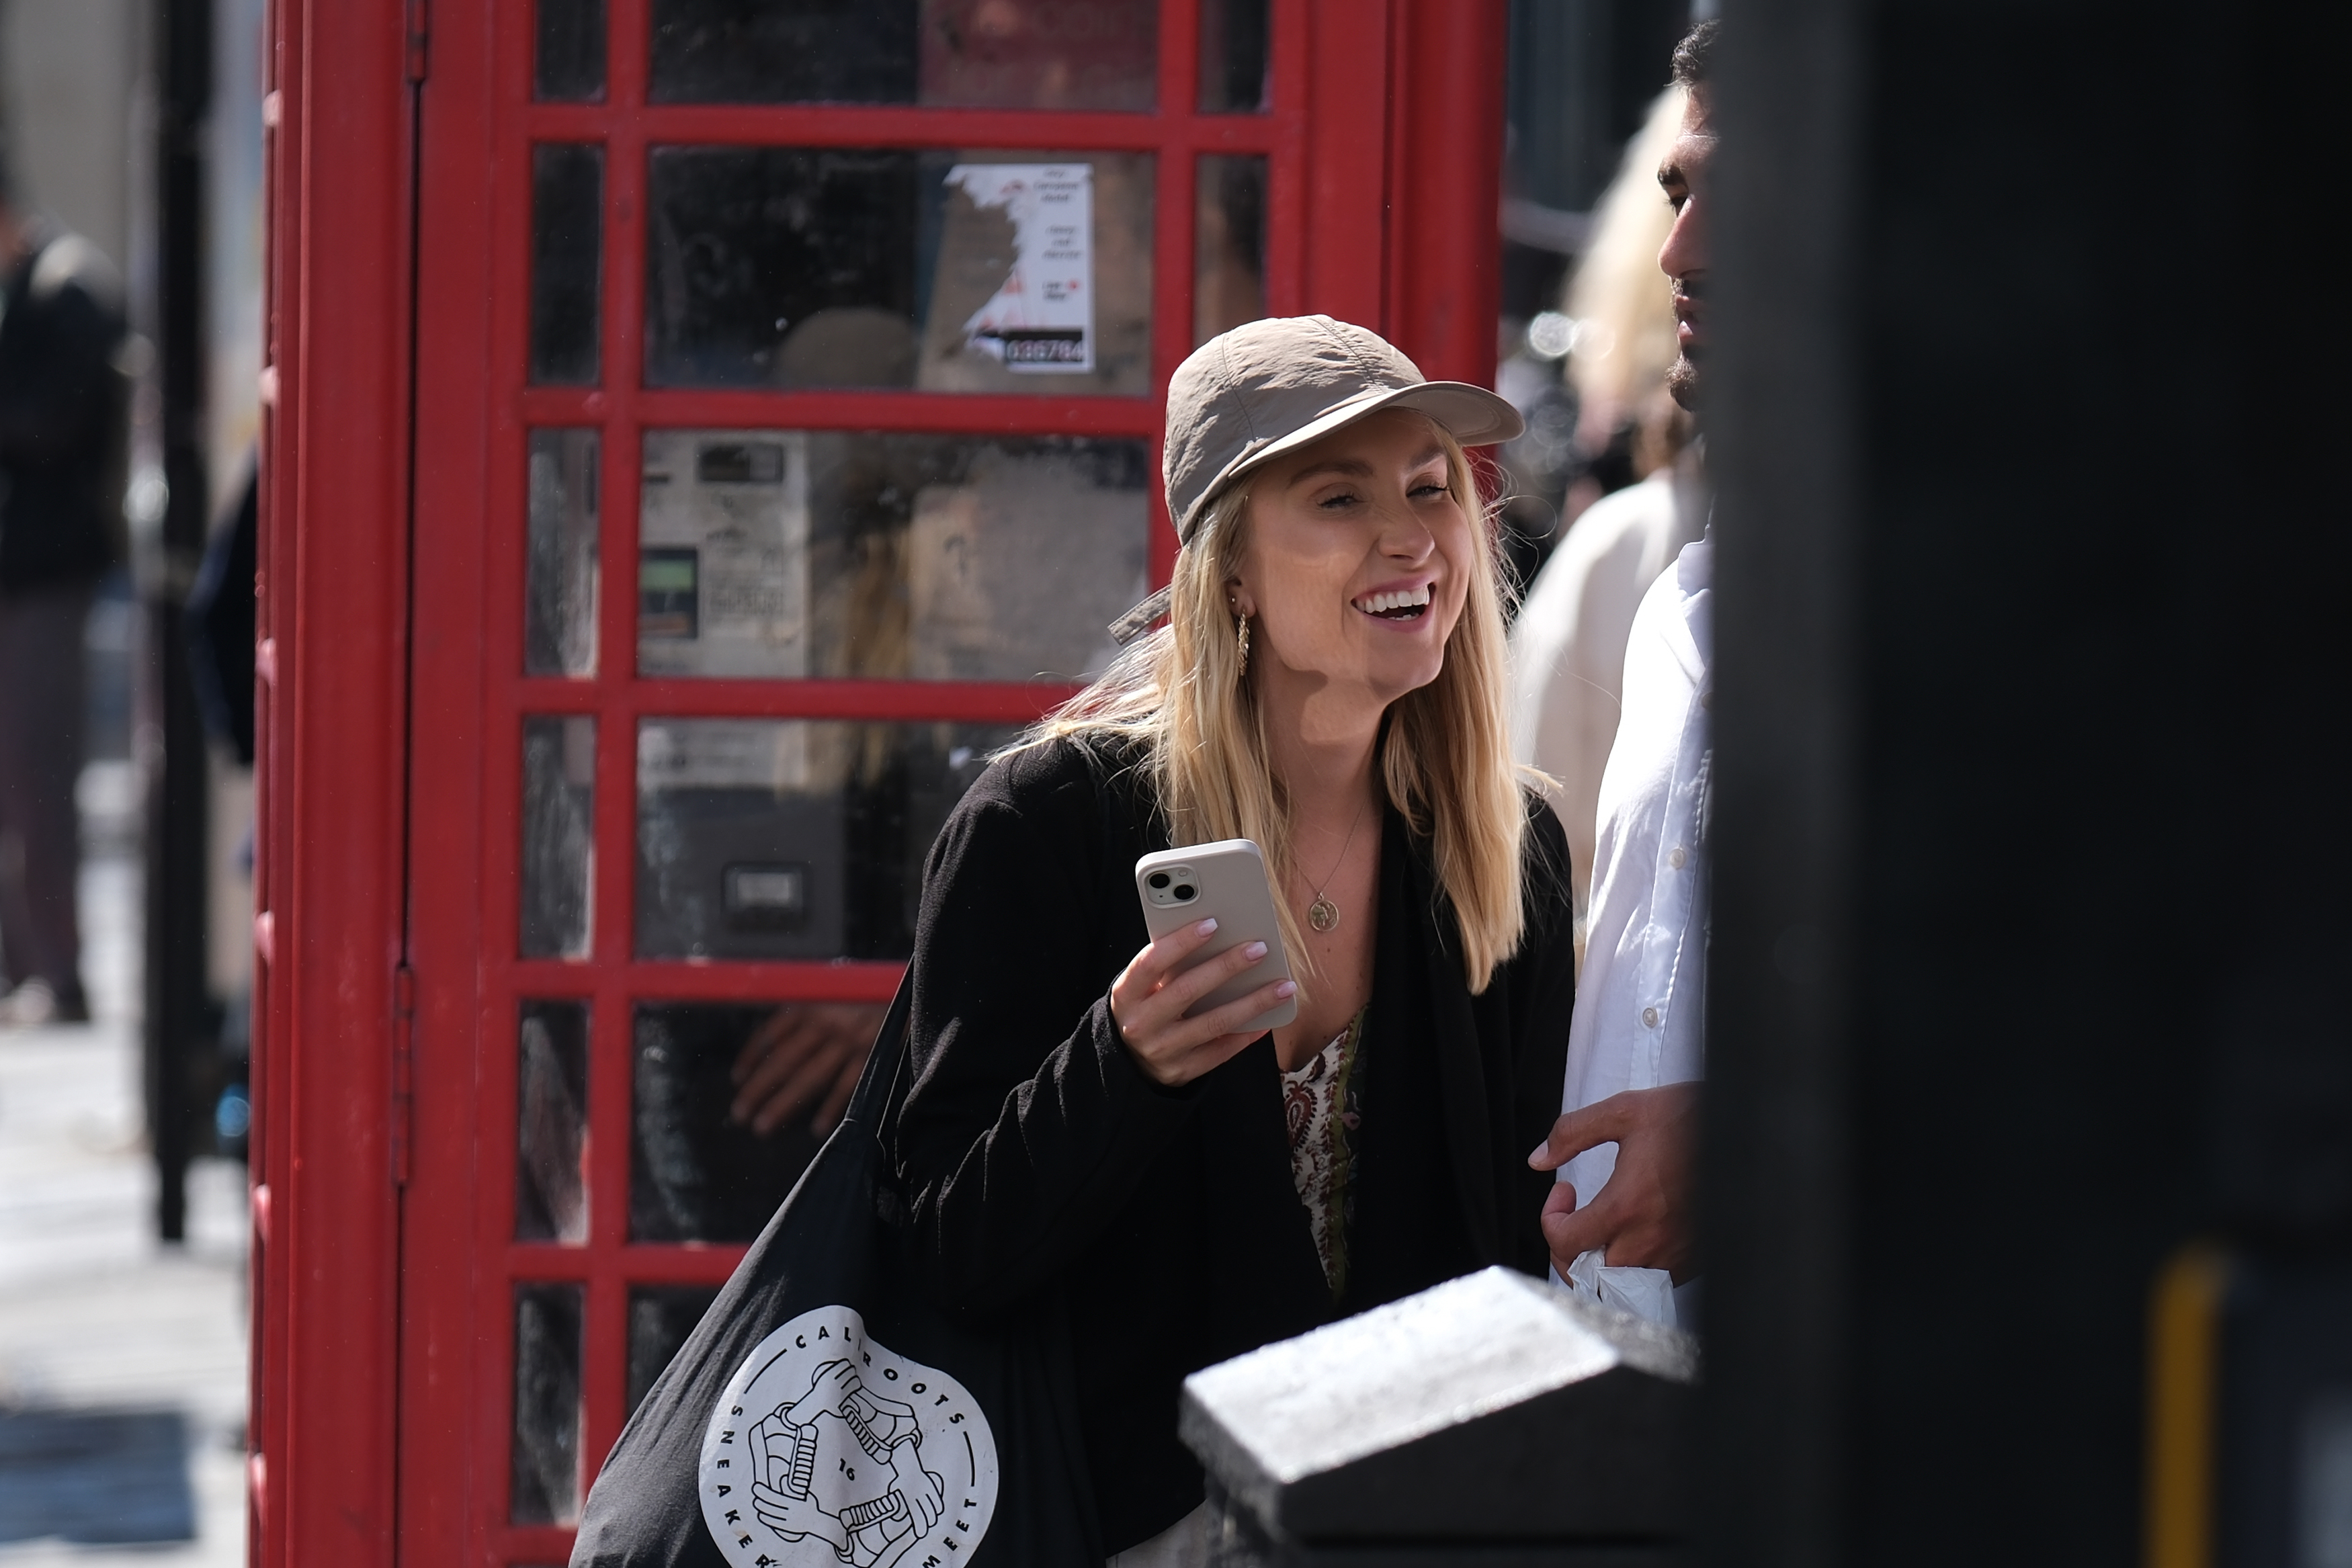 A woman holding a phone and laughing on a London street